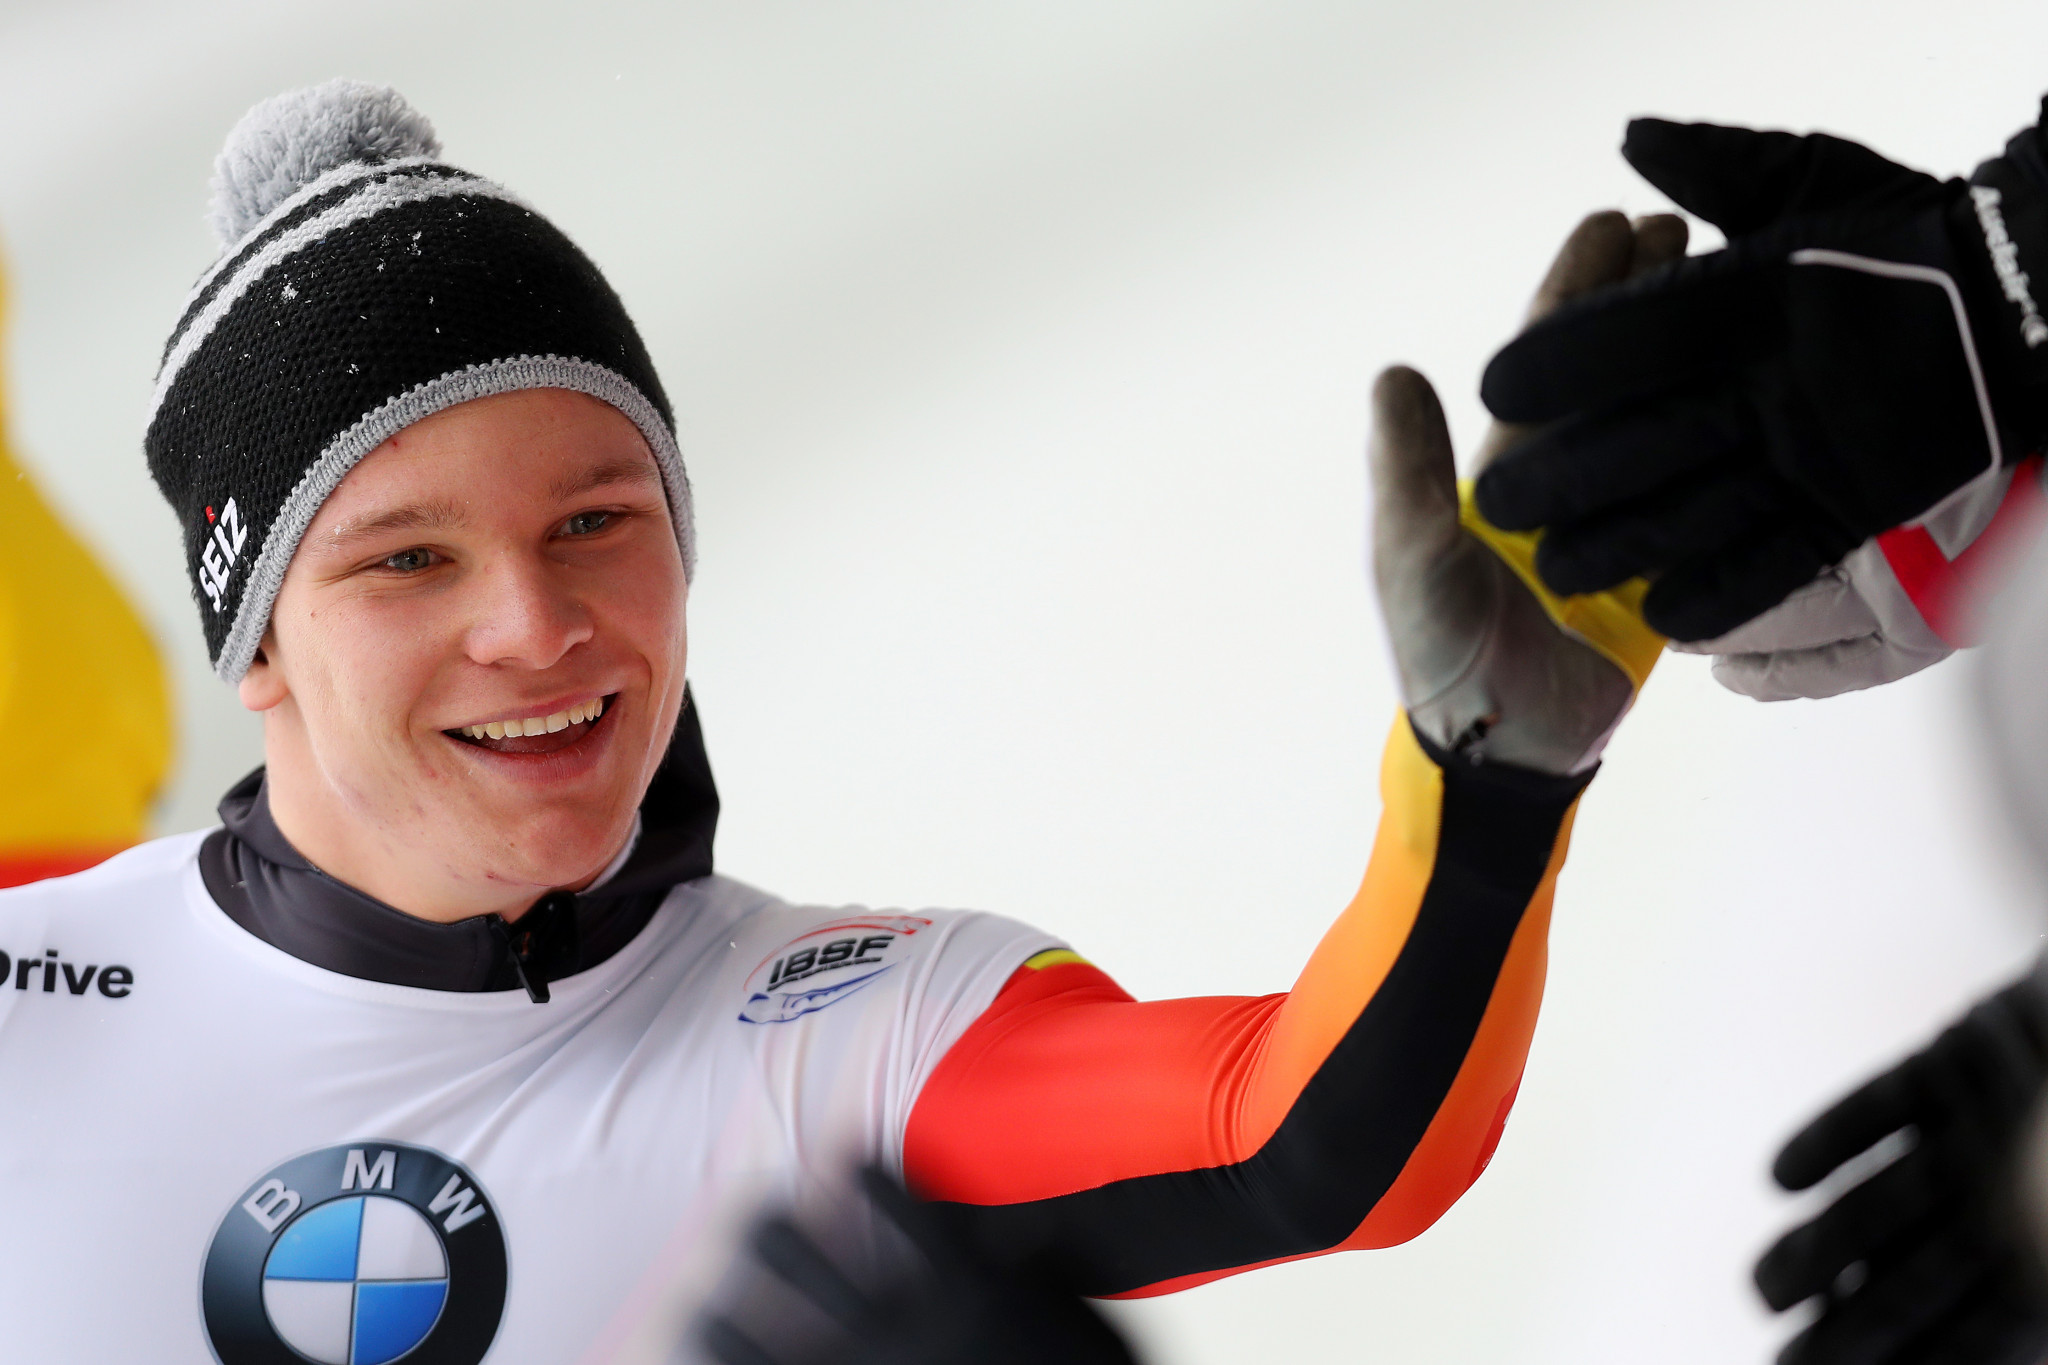 Young talent look to impress at IBSF Bobsleigh World Cup